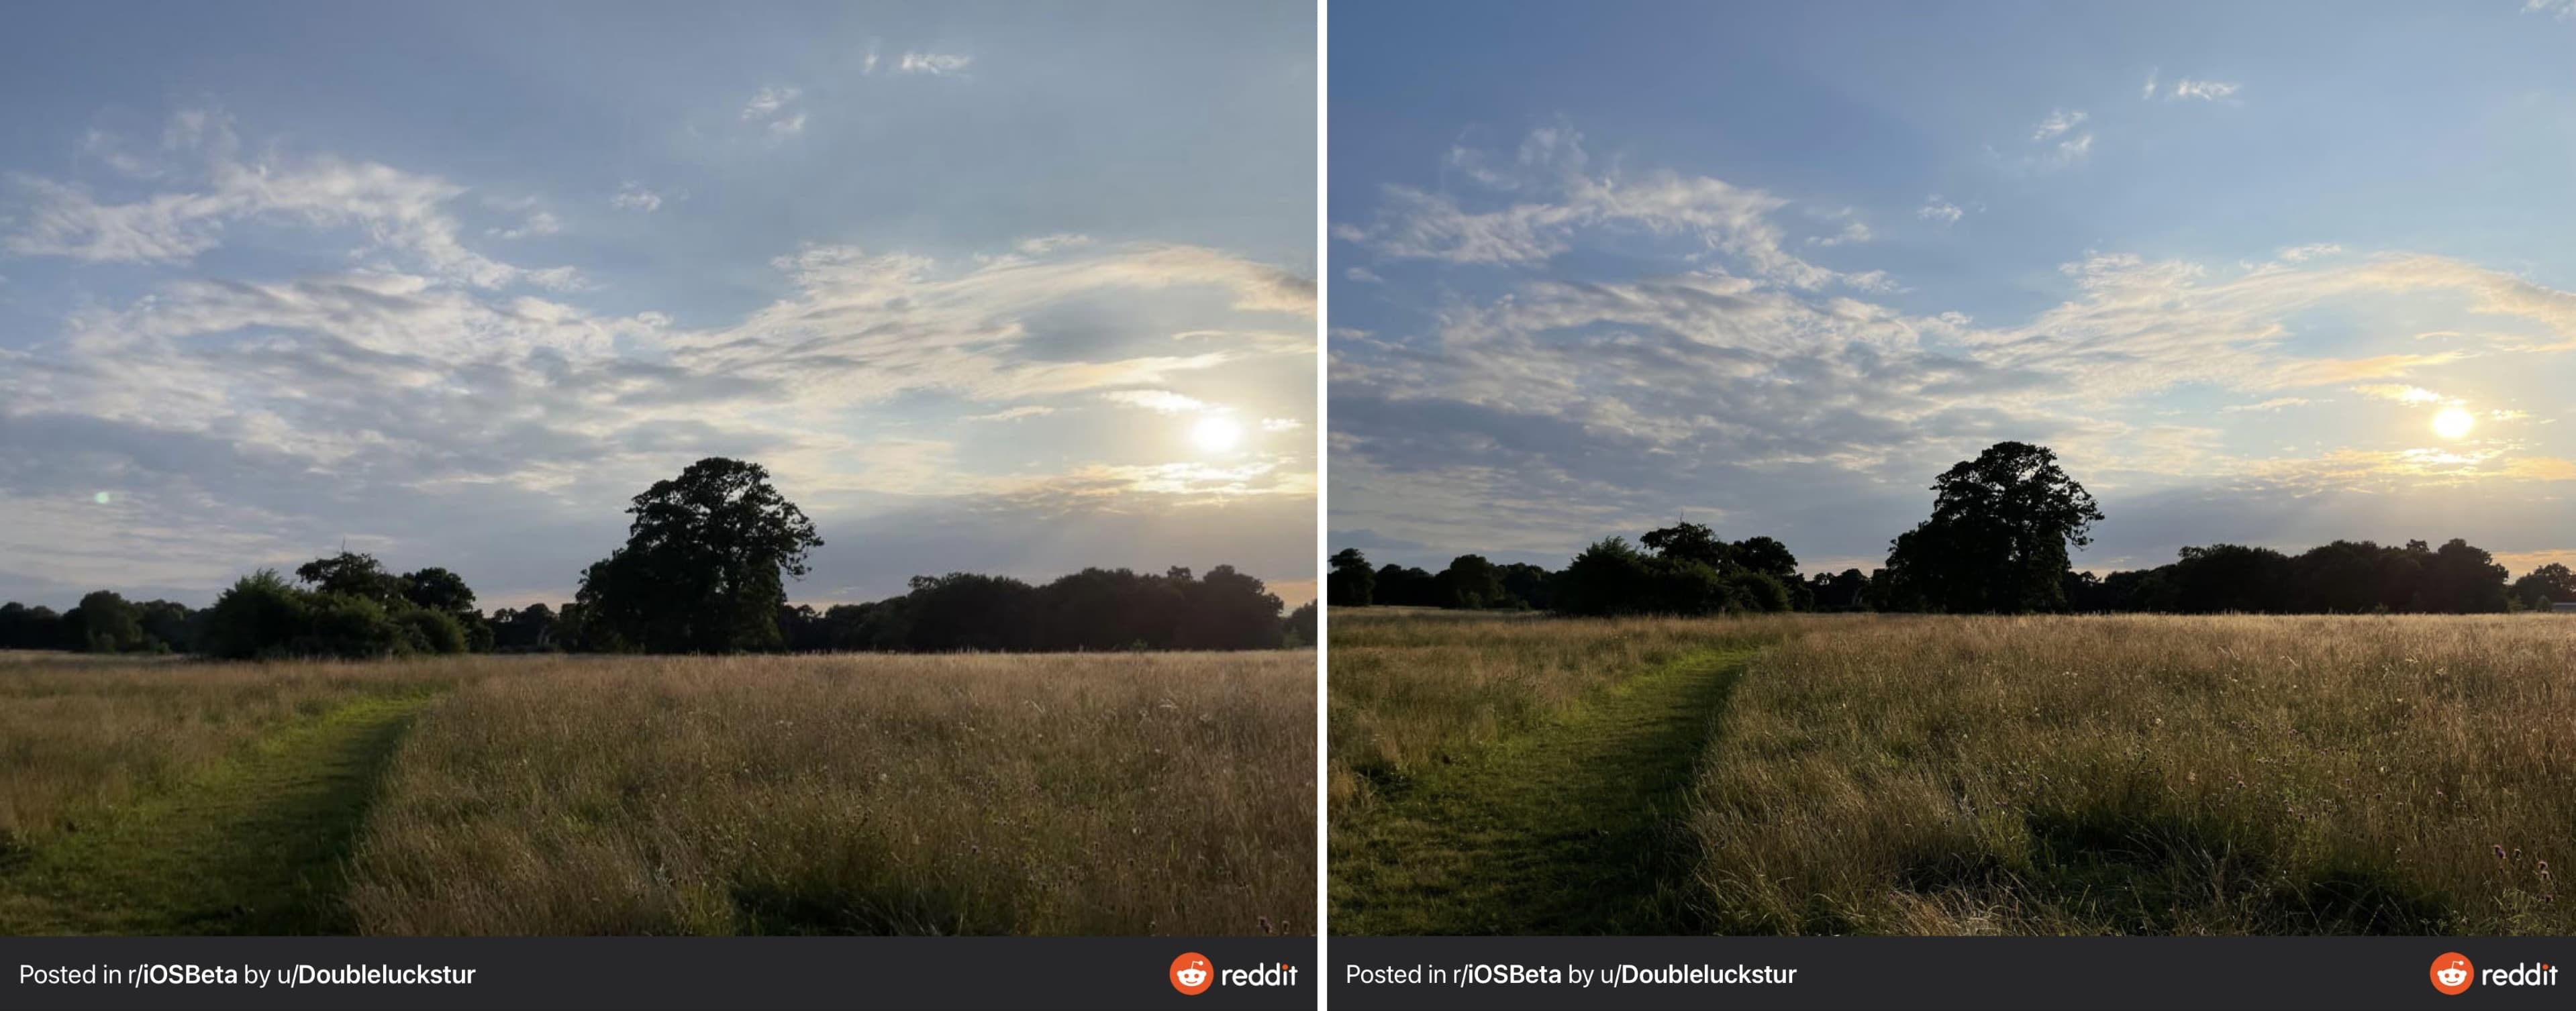 iOS 15 automatically removes lens flare in iPhone photos